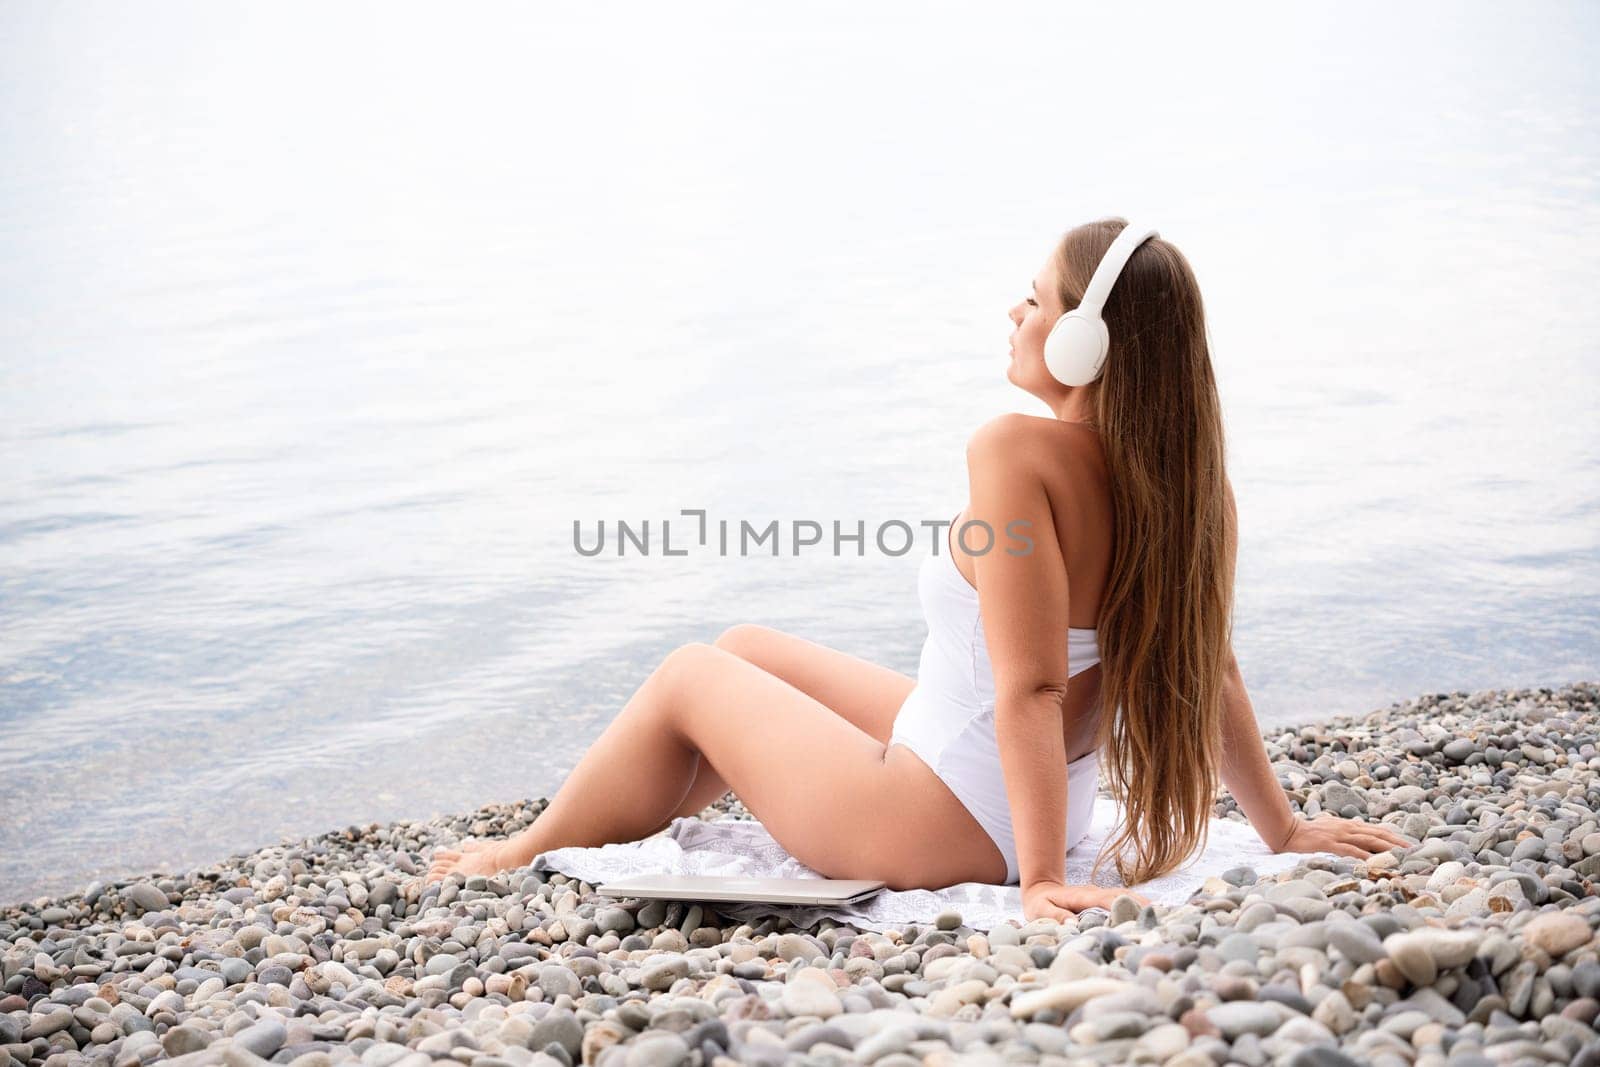 A woman is sitting on a beach with her headphones on. She is wearing a white bikini and a white shirt. The beach is rocky and the water is calm. The woman is enjoying her time by the water